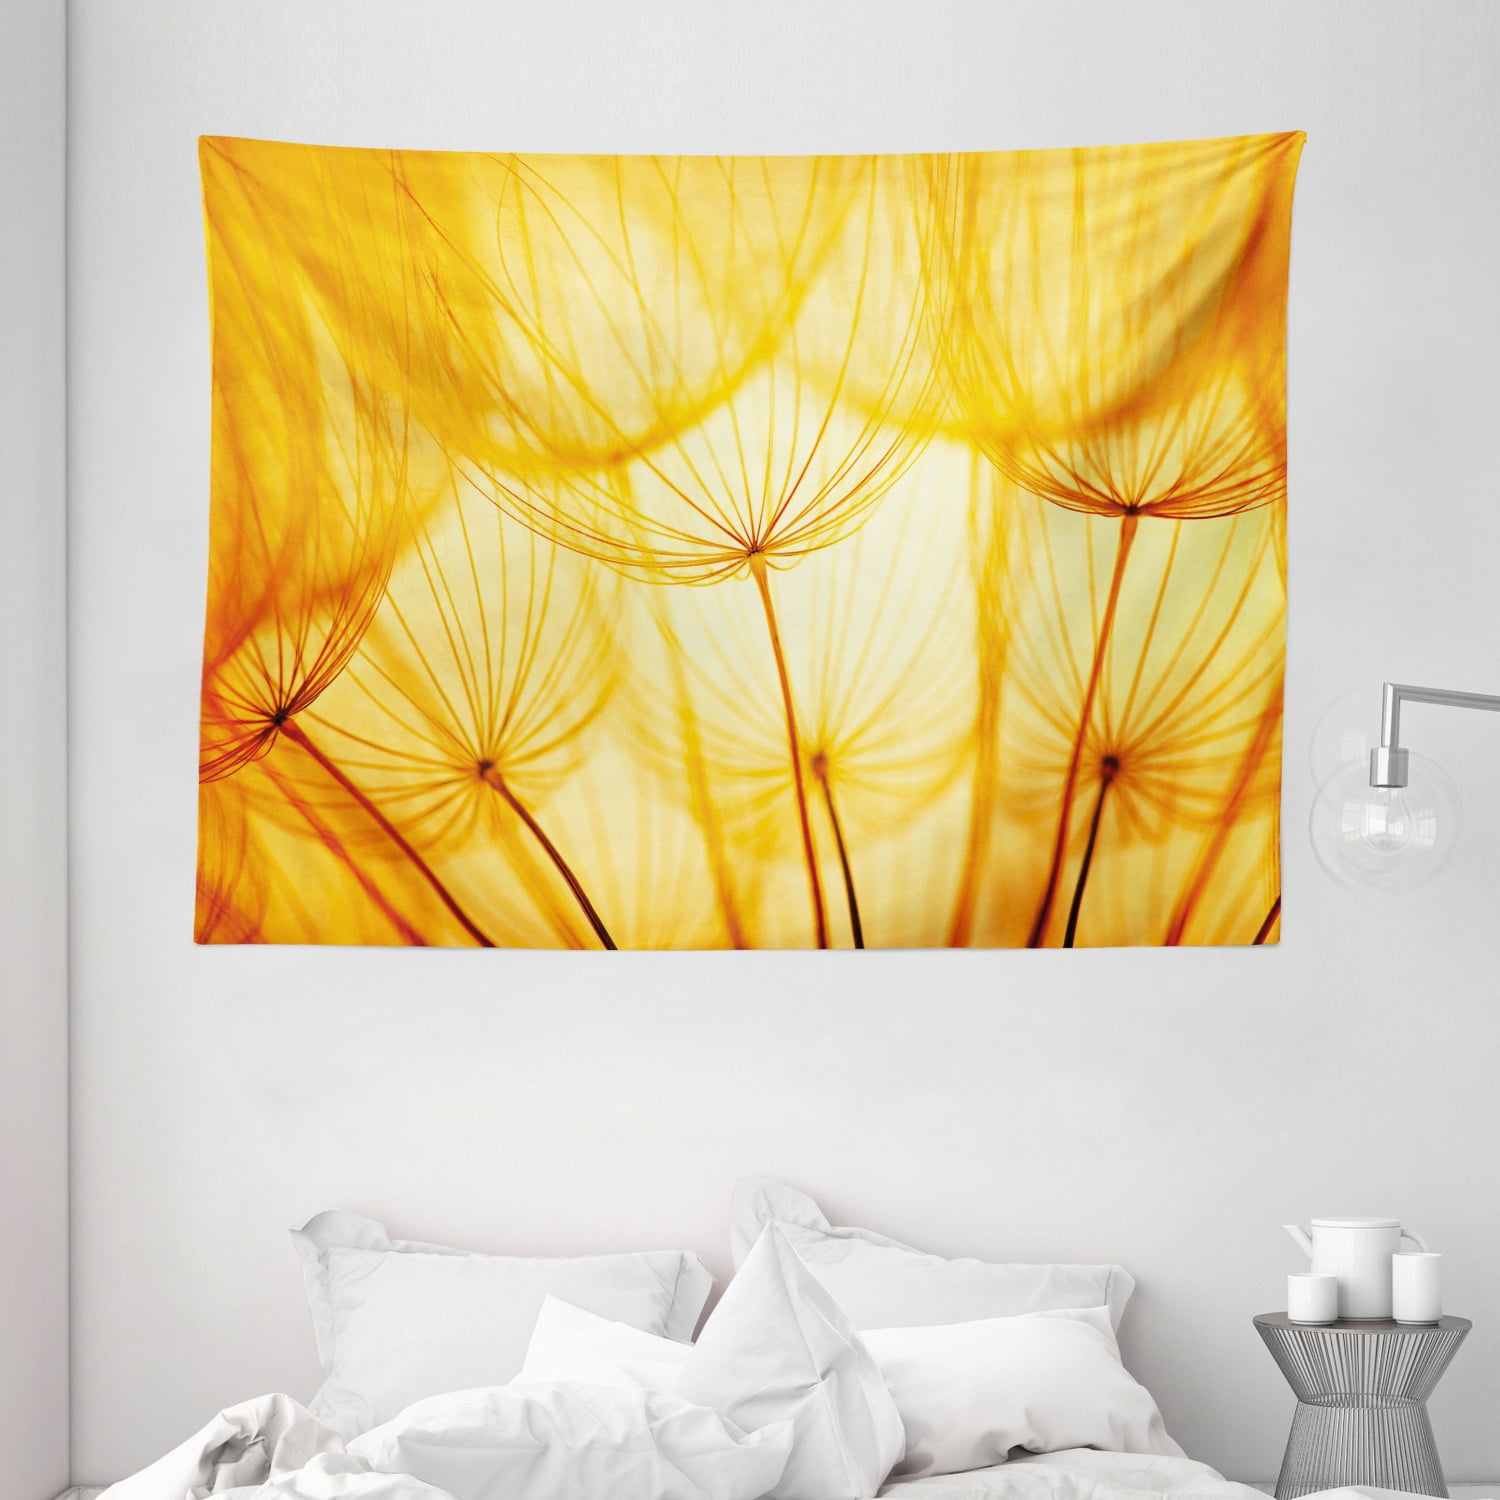 Dandelion Water Wall Hanging Tapestry Psychedelic Bedroom Home Decoration 